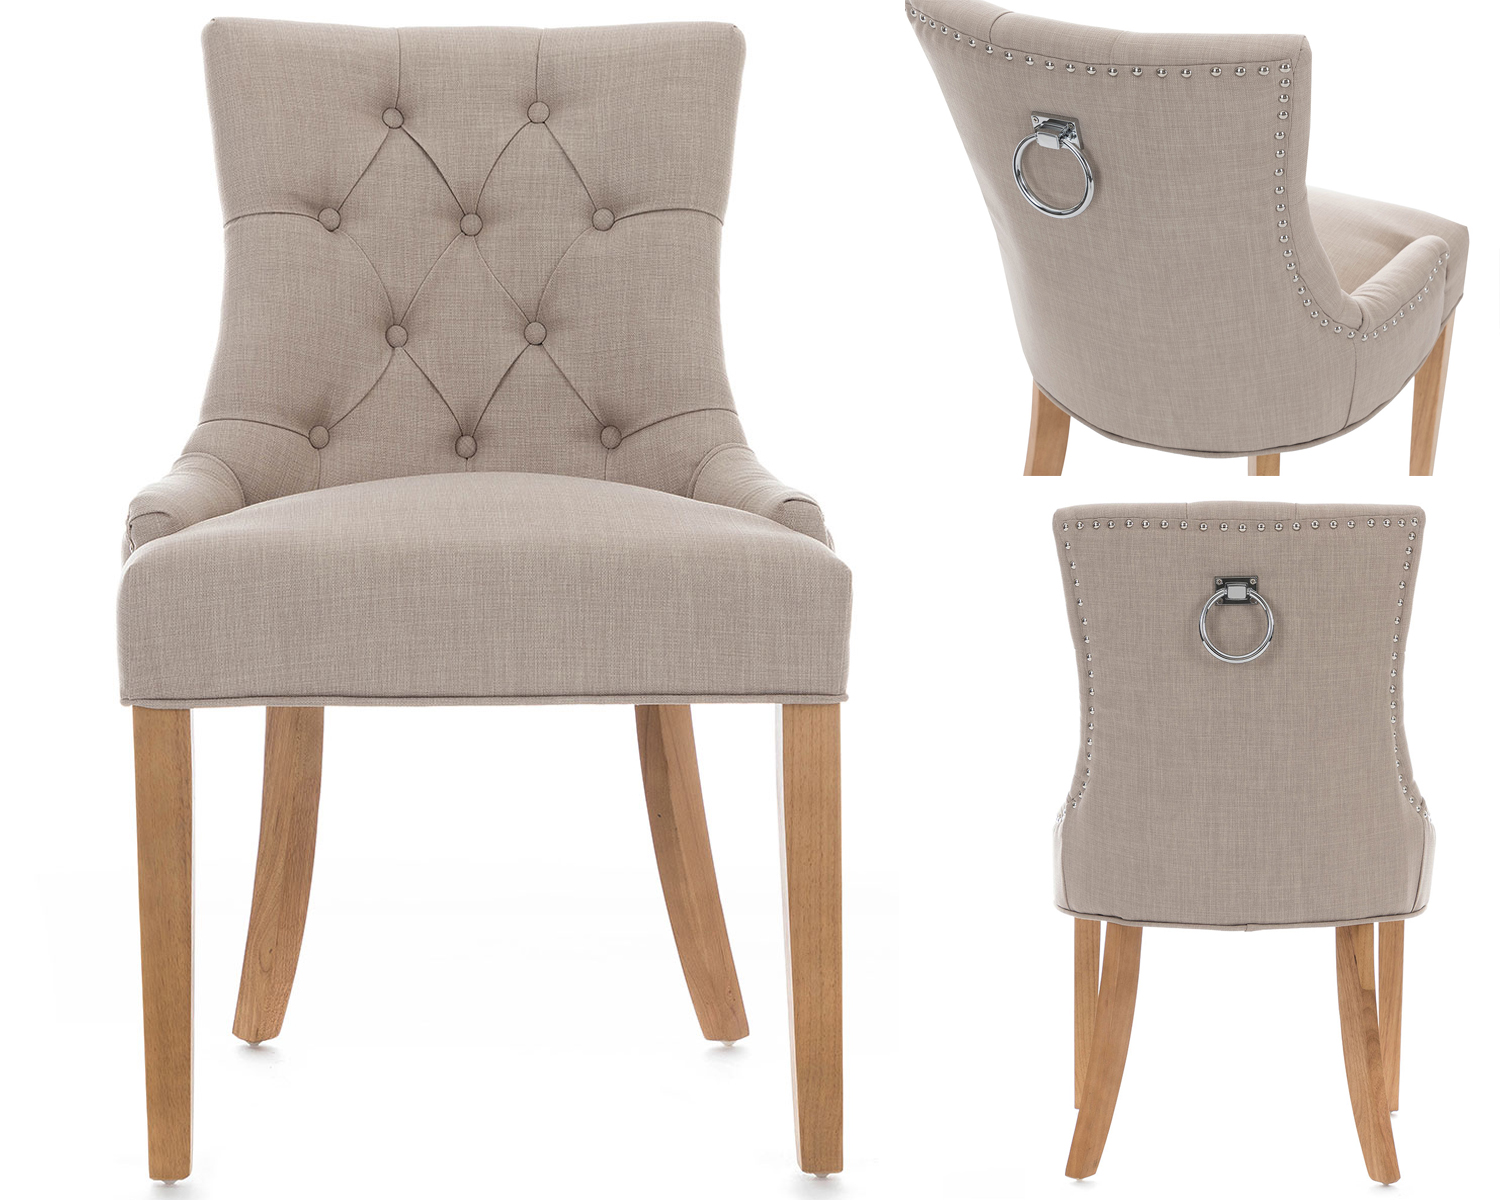 Scoop Button Back Dining Chair in Cream Linen with Chrome Knocker & Oak